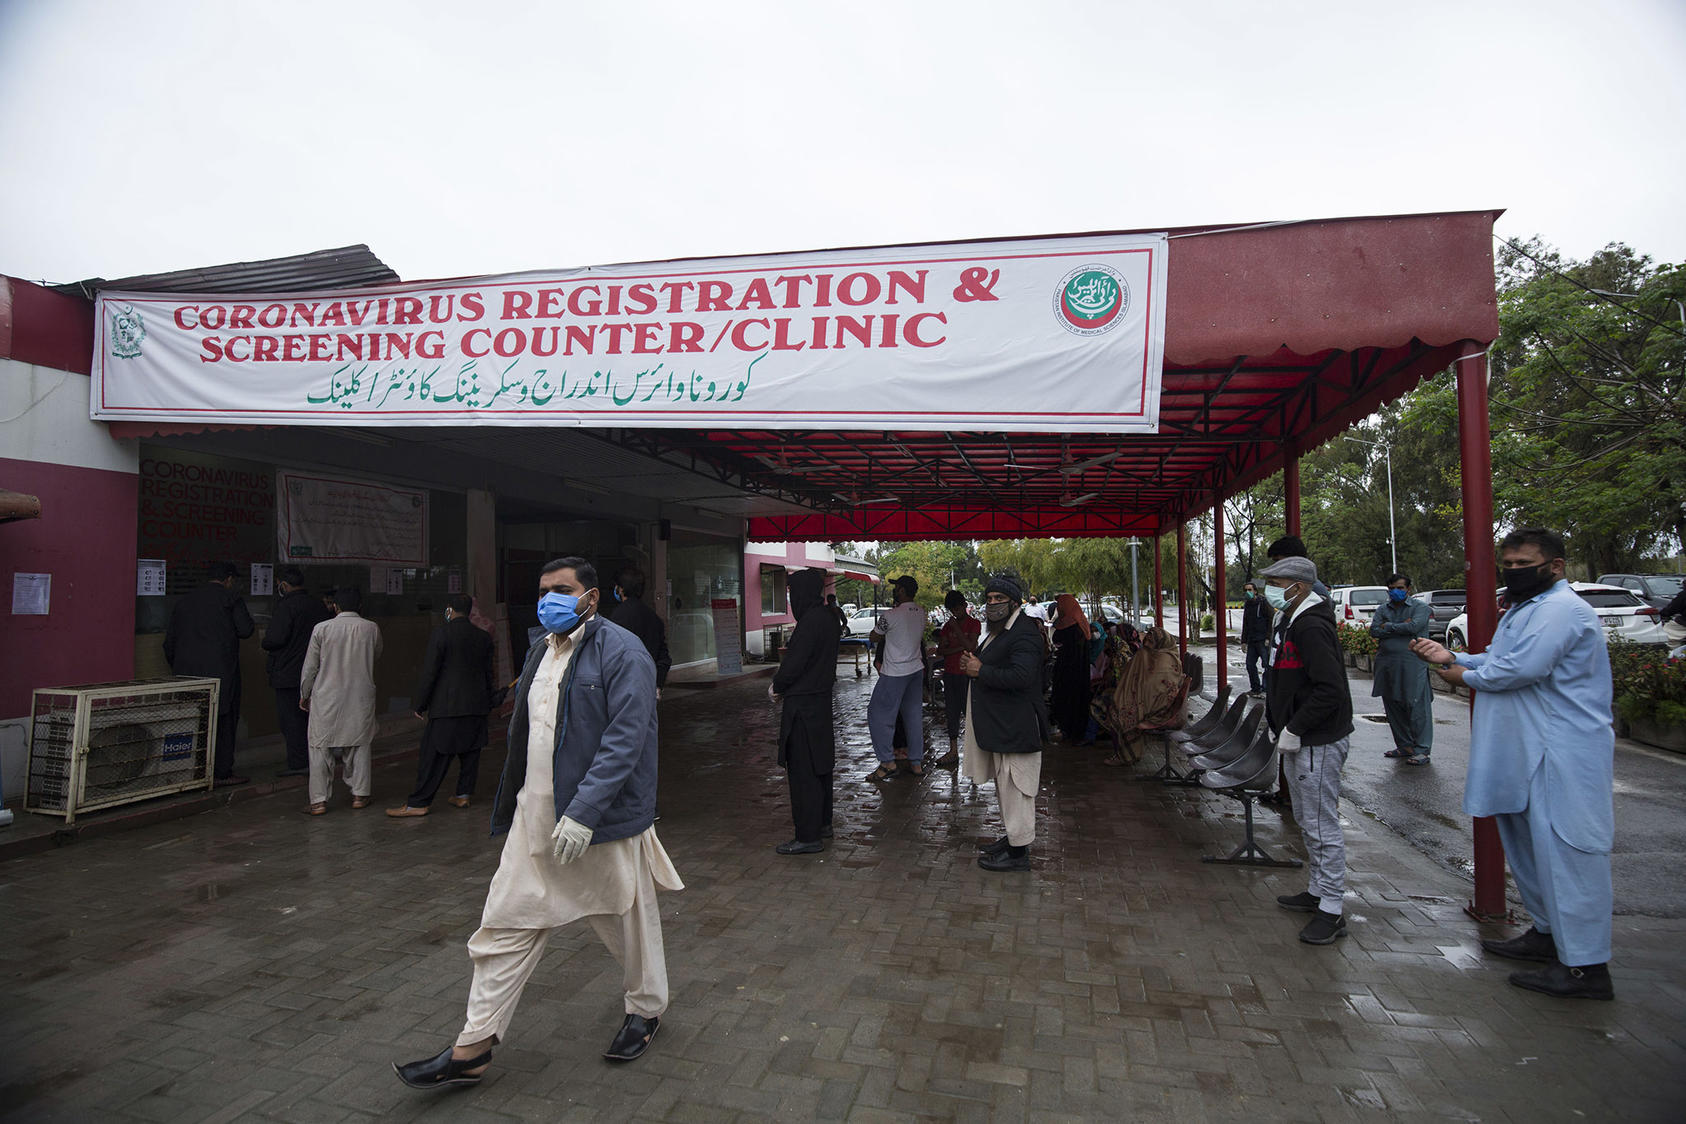 People wait to be tested for COVID-19 at a screening center in Islamabad, Pakistan. March 24, 2020. (Saiyna Bashir/The New York Times)